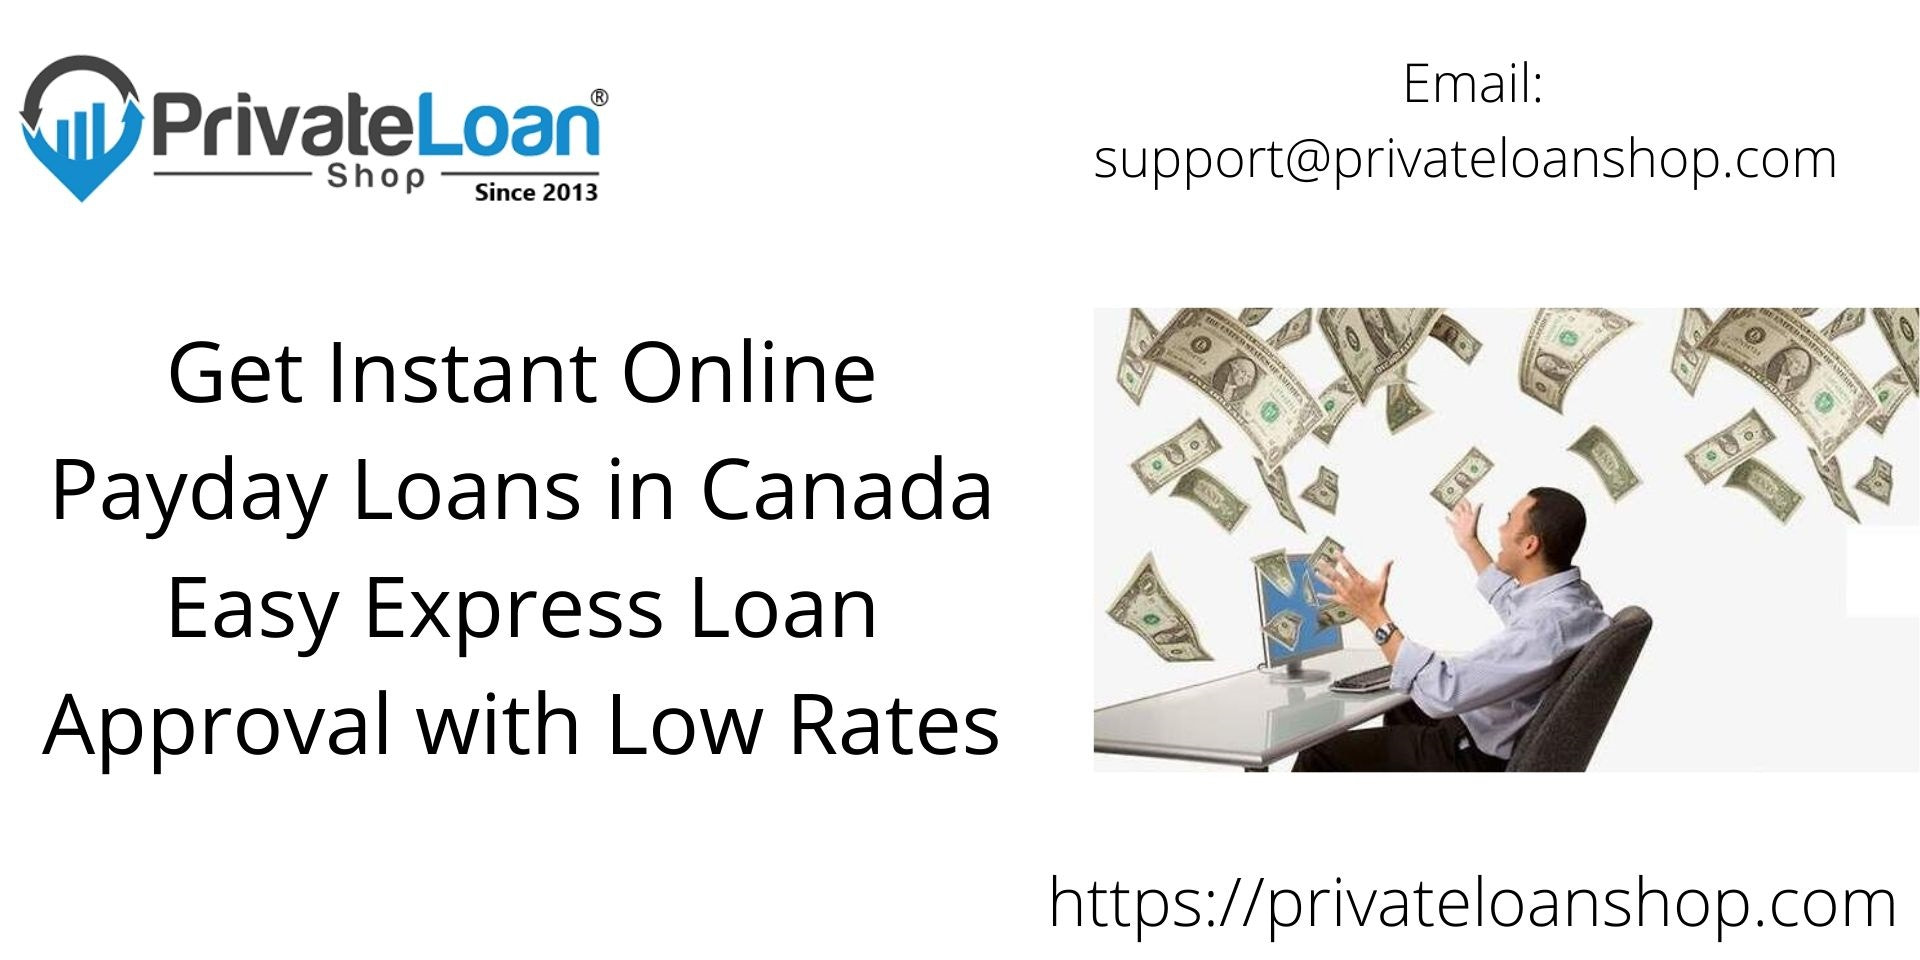 Payday Loans Canada - Private Loan Shop